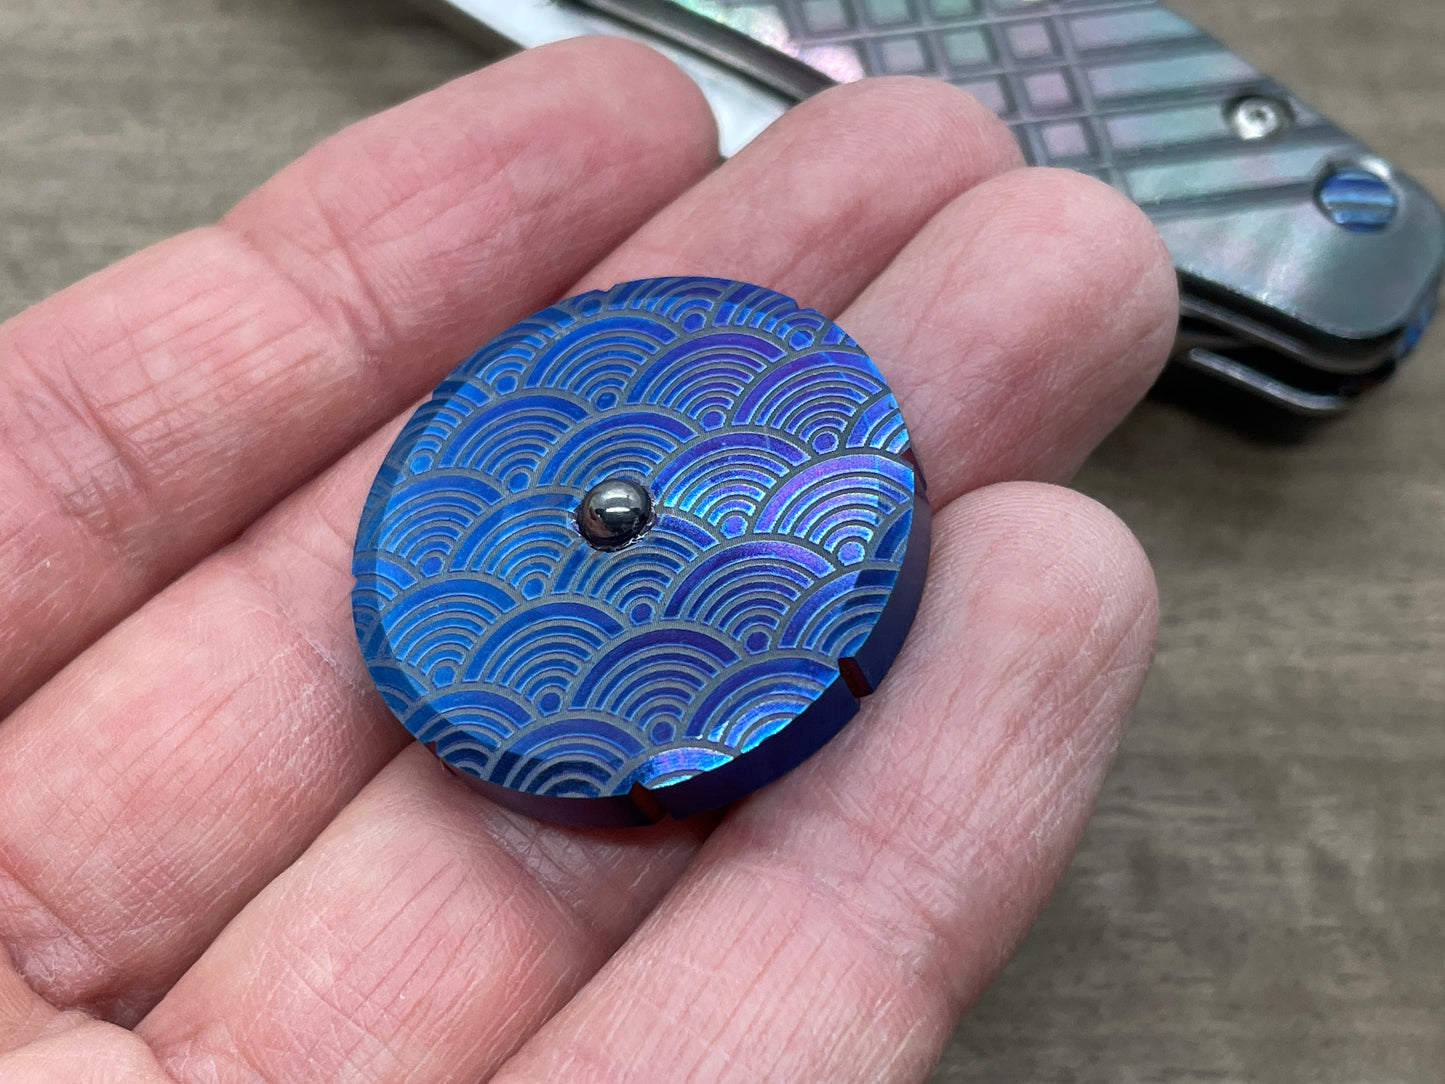 SEIGAIHA Flamed Titanium Spinning Worry Coin Spinning Top